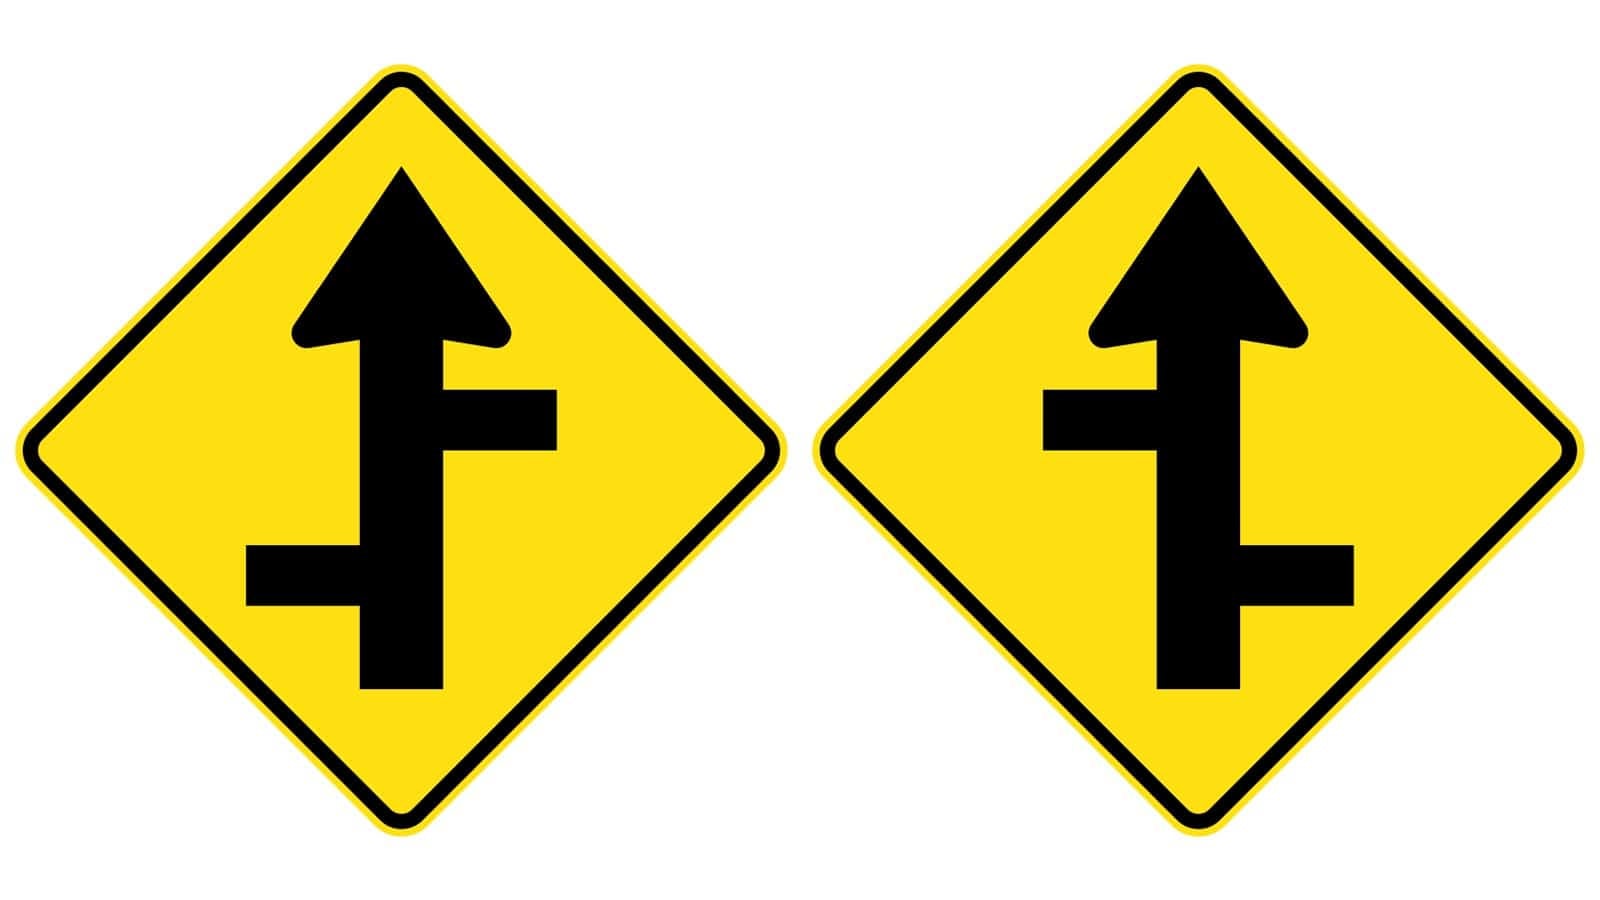 Staggered Side Road Intersection, First from Left : Right